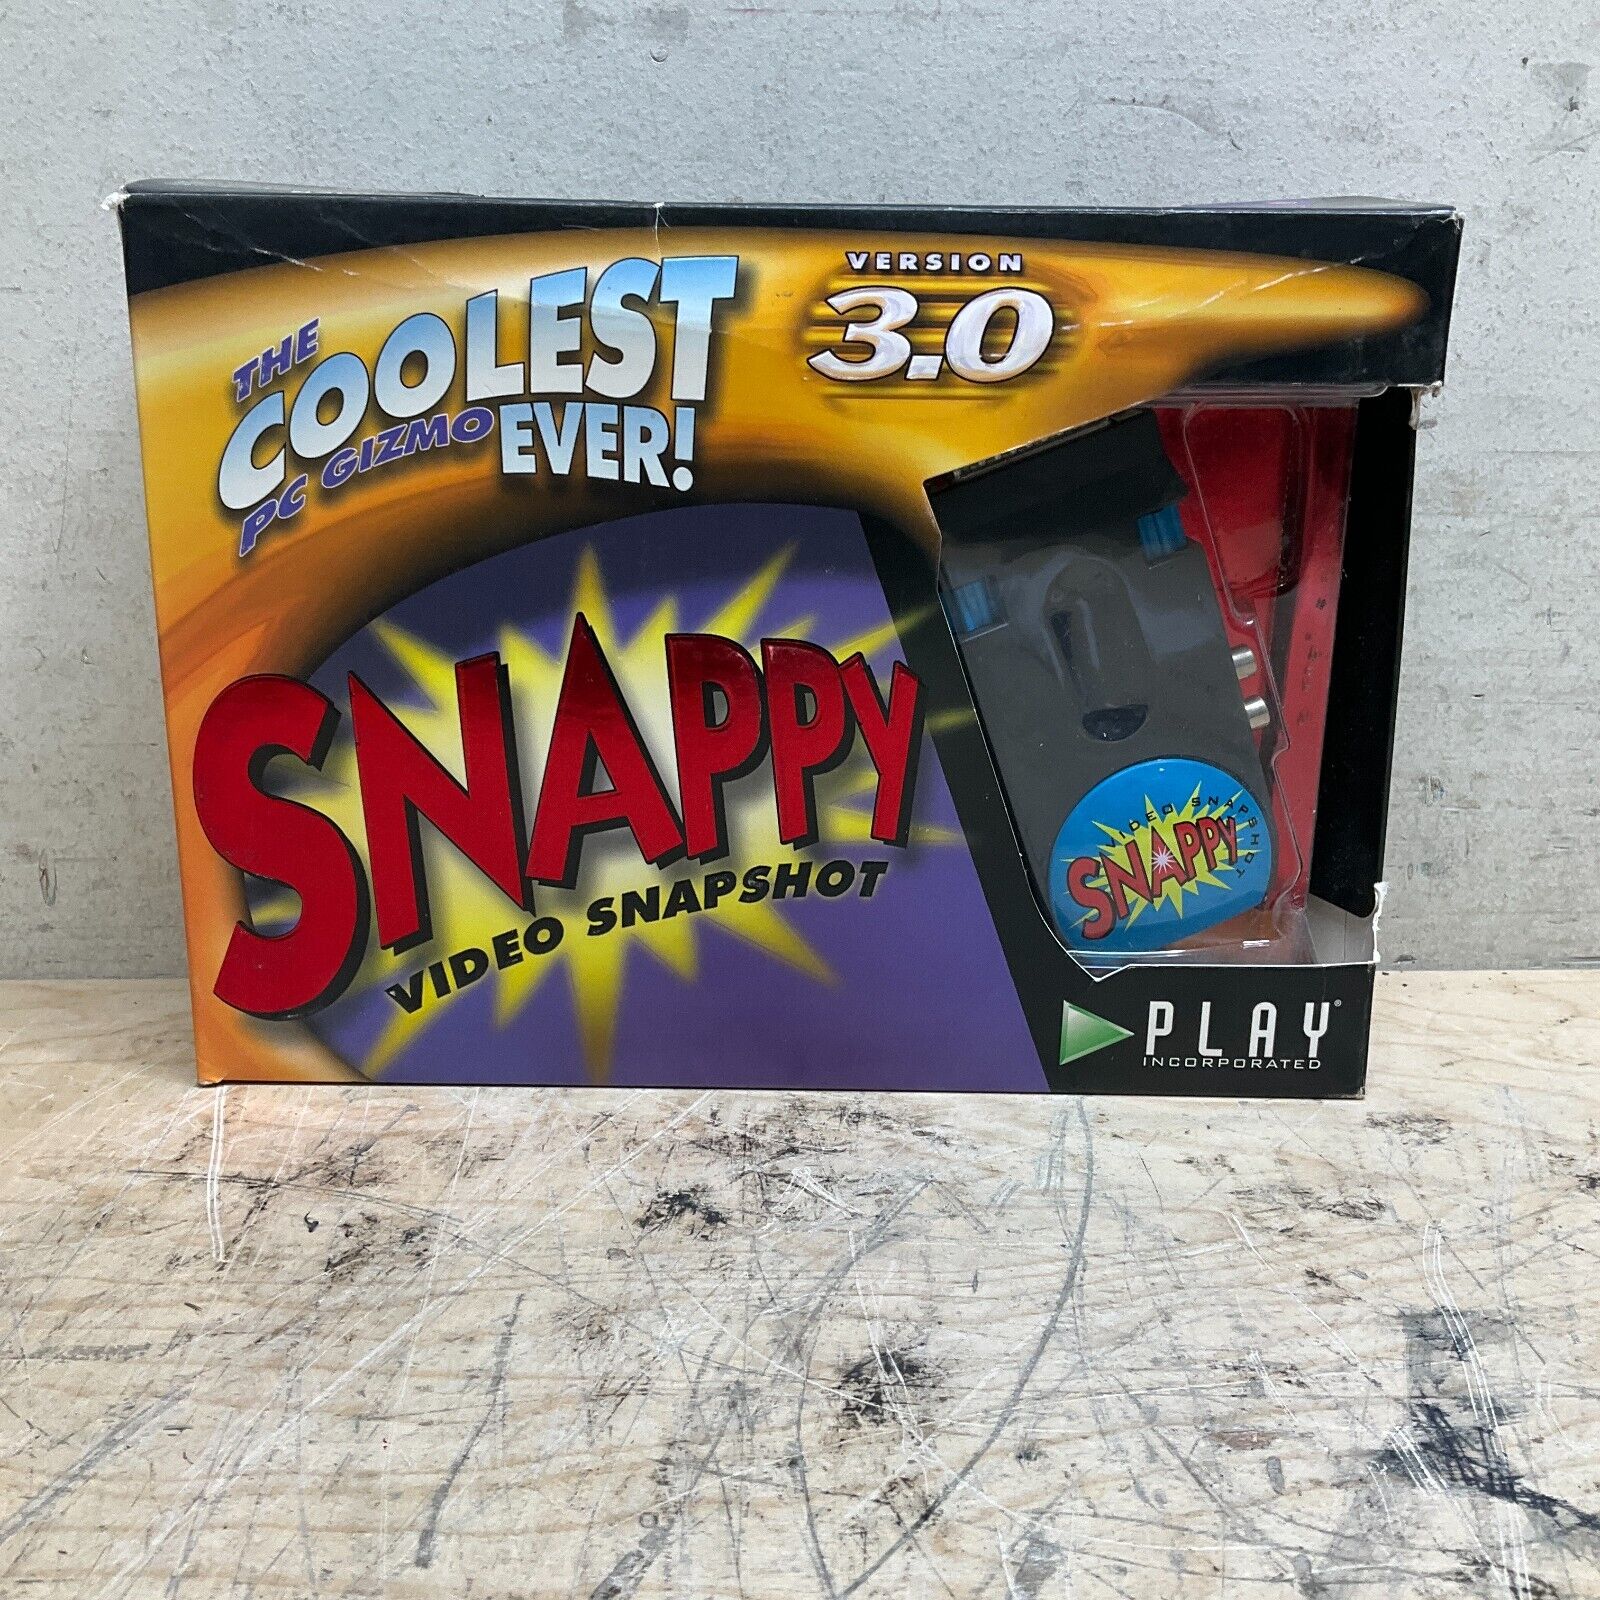 Vintage Snappy Video Snapshot PC Gizmo Version 3.0 software NEW IN BOX